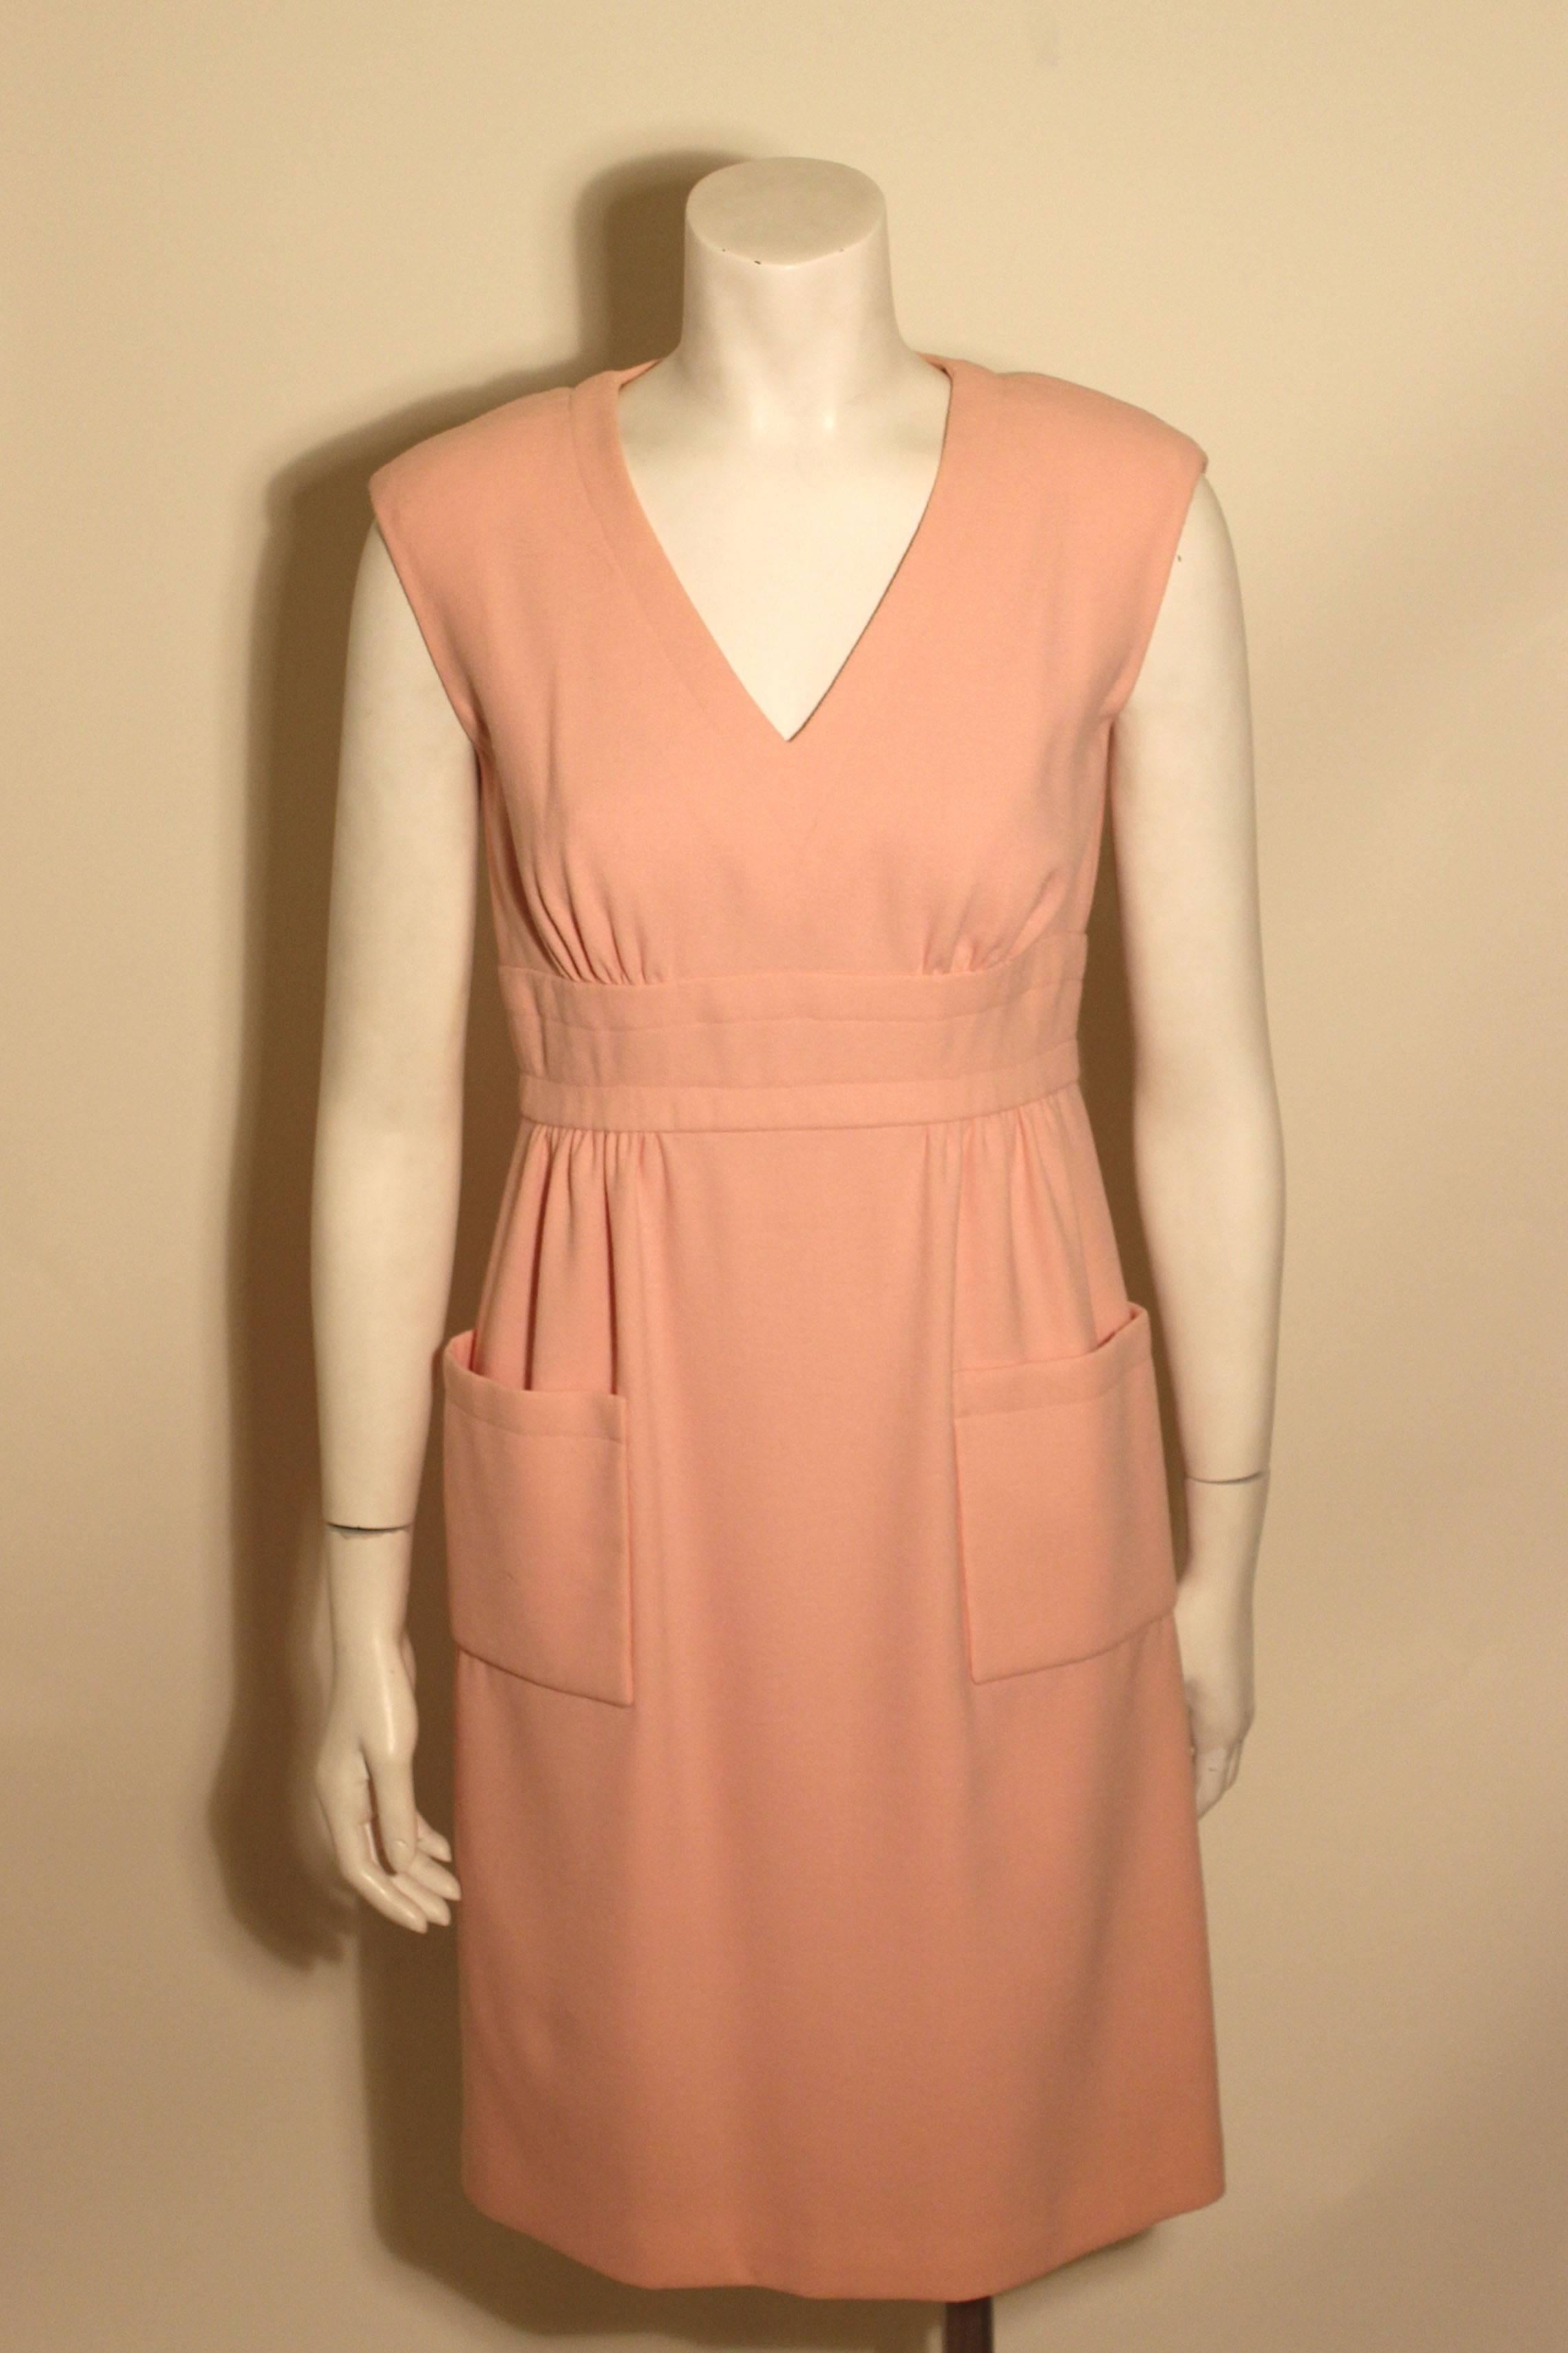 Vintage 1960's style baby pink dress by Trigere featuring a flattering V neckline, a defined waist line with delicate gathers, and two patch pockets at the hips. It has a full silk lining. 